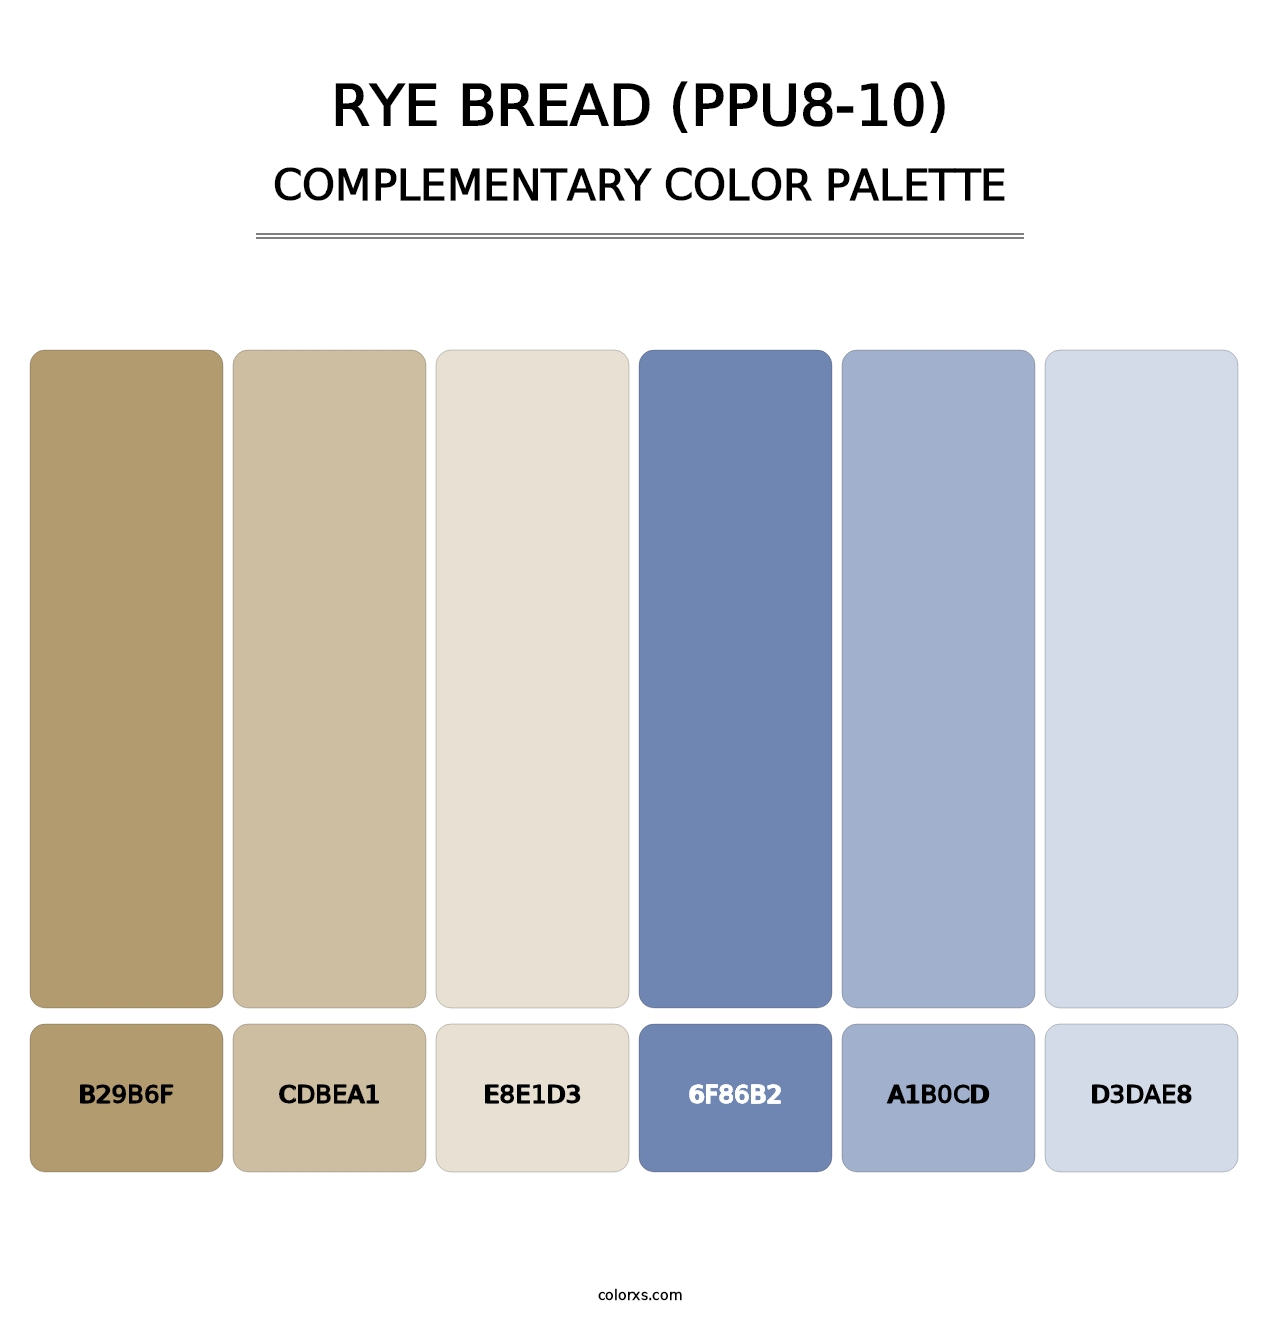 Rye Bread (PPU8-10) - Complementary Color Palette